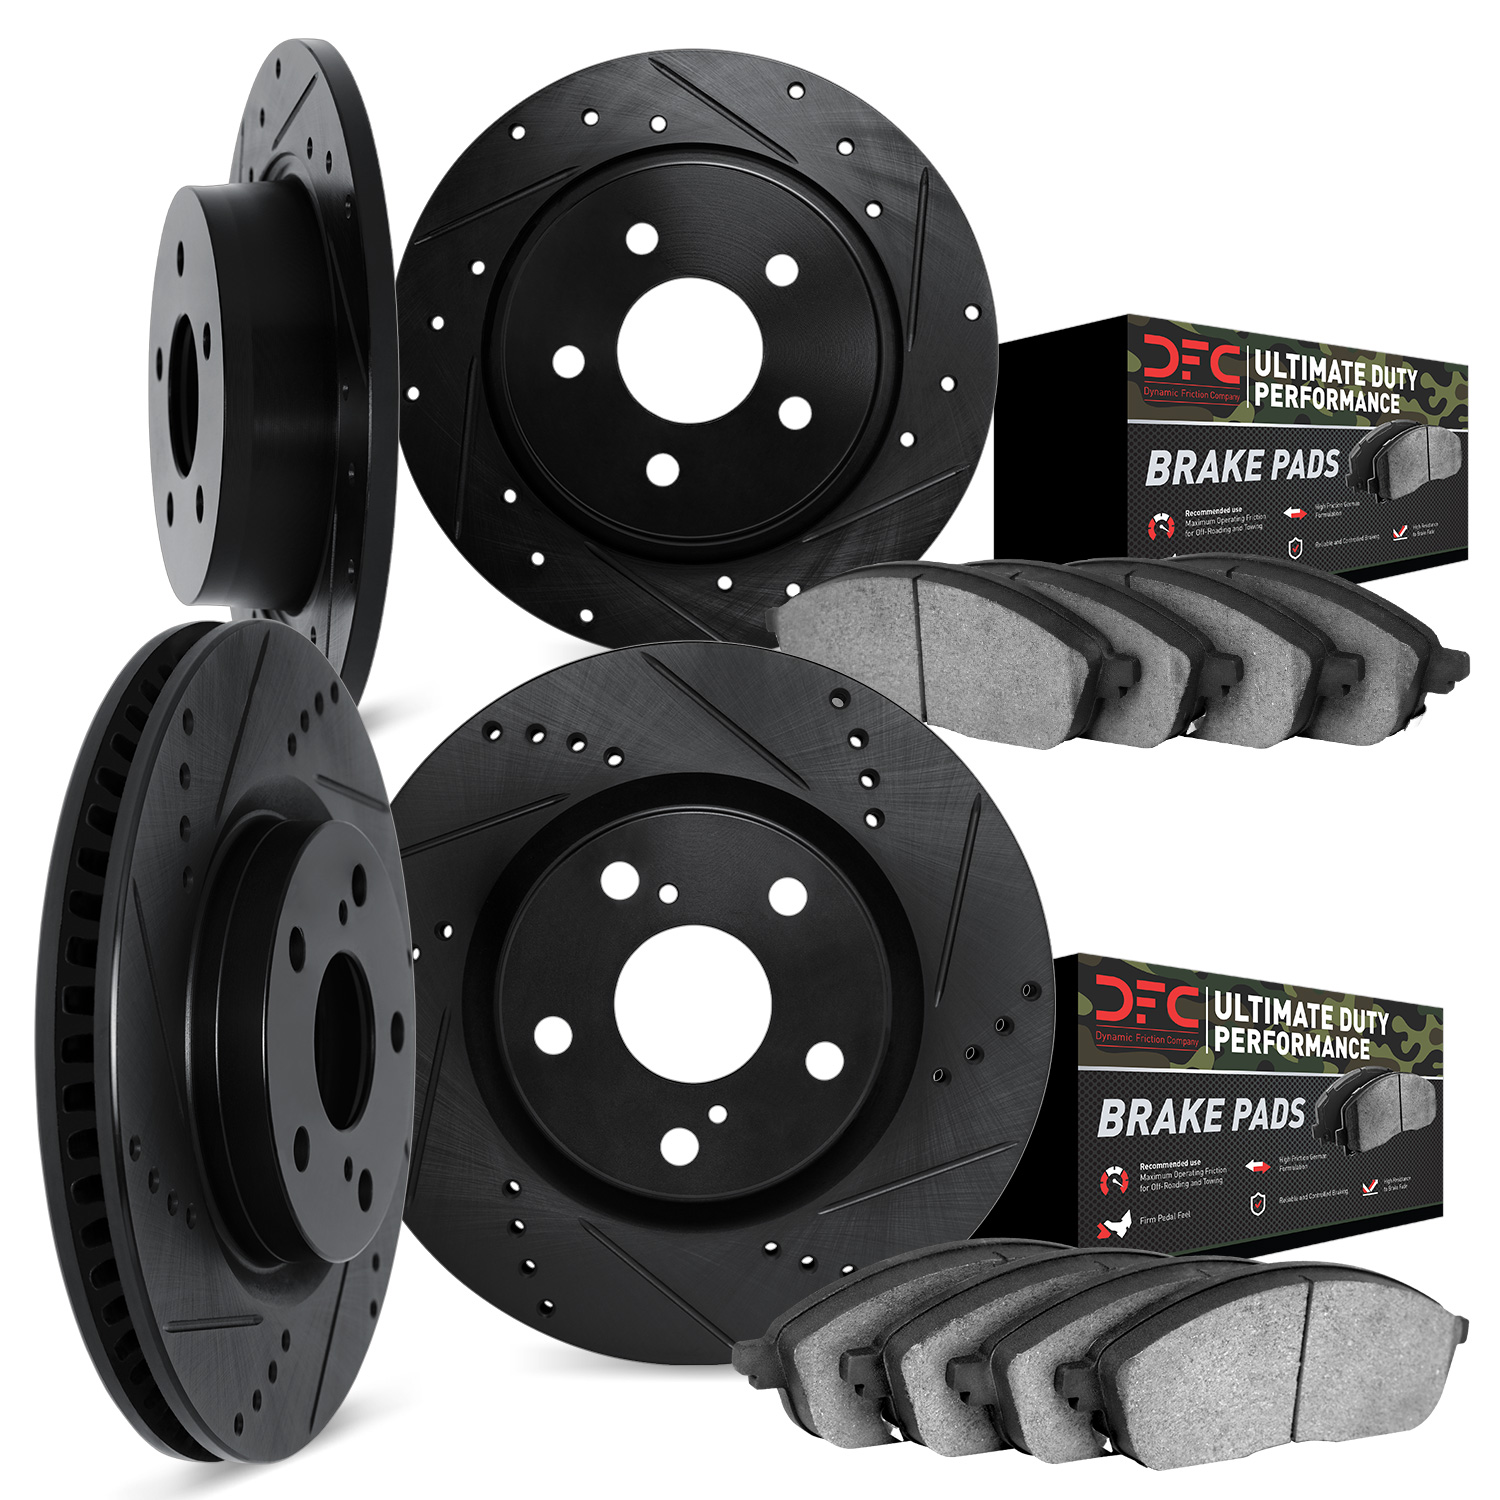 8404-42014 Drilled/Slotted Brake Rotors with Ultimate-Duty Brake Pads Kit [Black], 1999-2004 Mopar, Position: Front and Rear